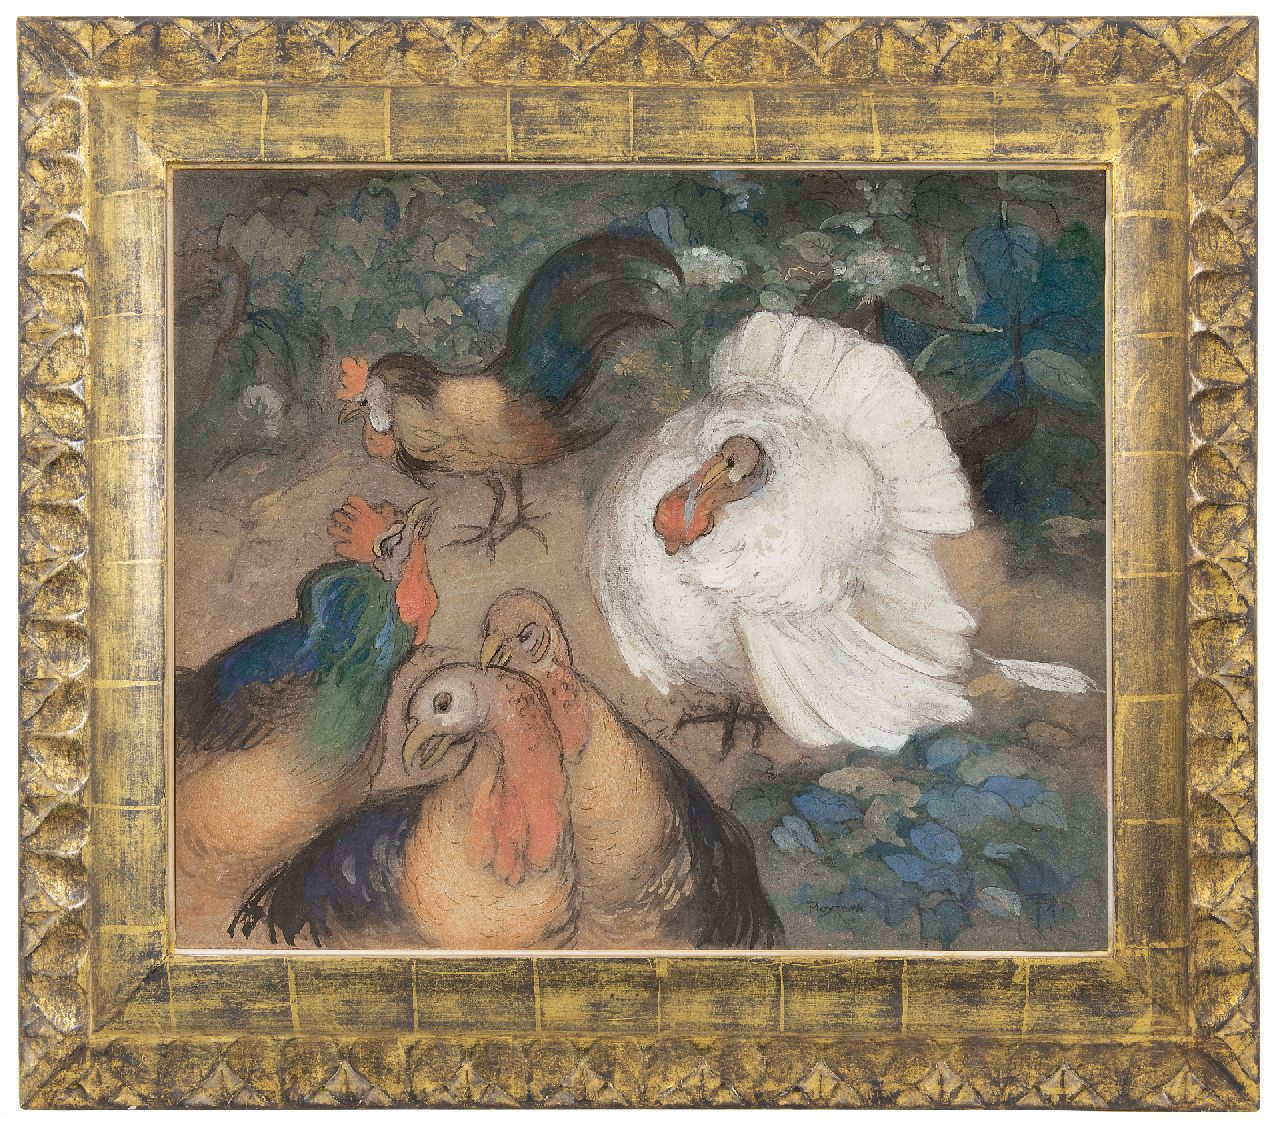 Hoytema Th. van | Theodorus 'Theo' van Hoytema | Watercolours and drawings offered for sale | Poultry, chalk and watercolour on board 49.6 x 59.6 cm, signed l.r. with monogram and in full